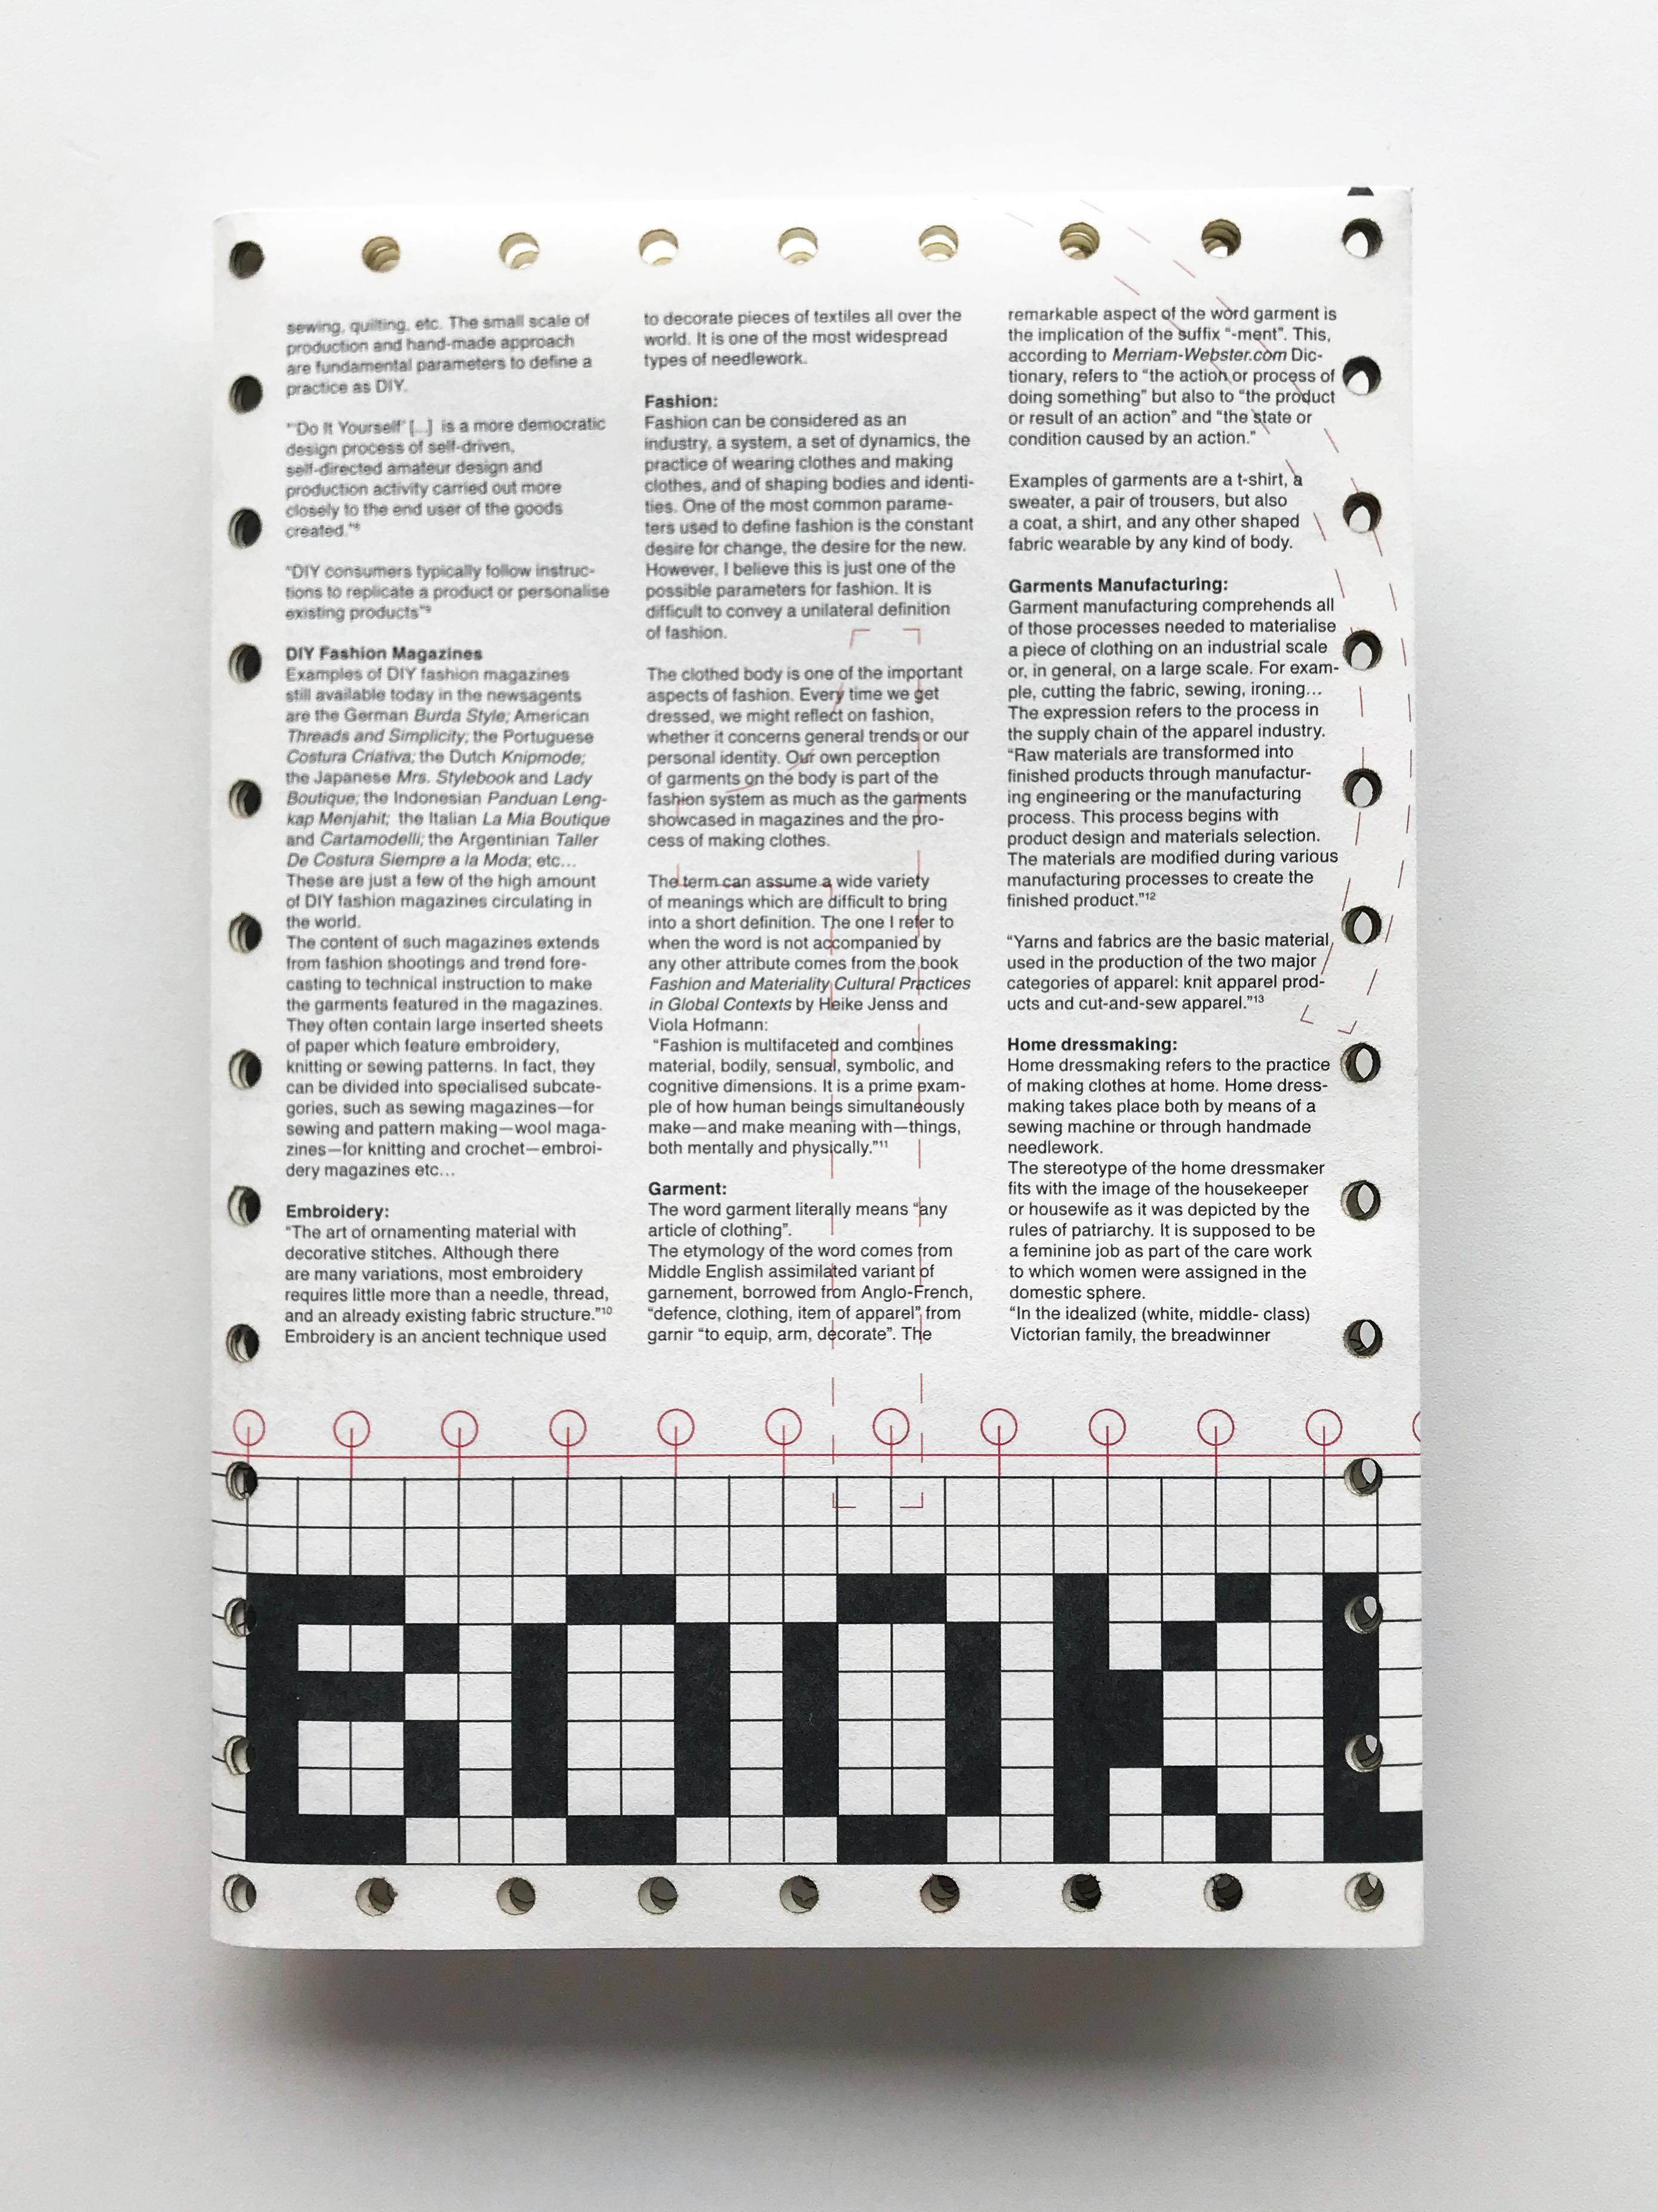 Booklook Shirt, issue 2, without crochet.